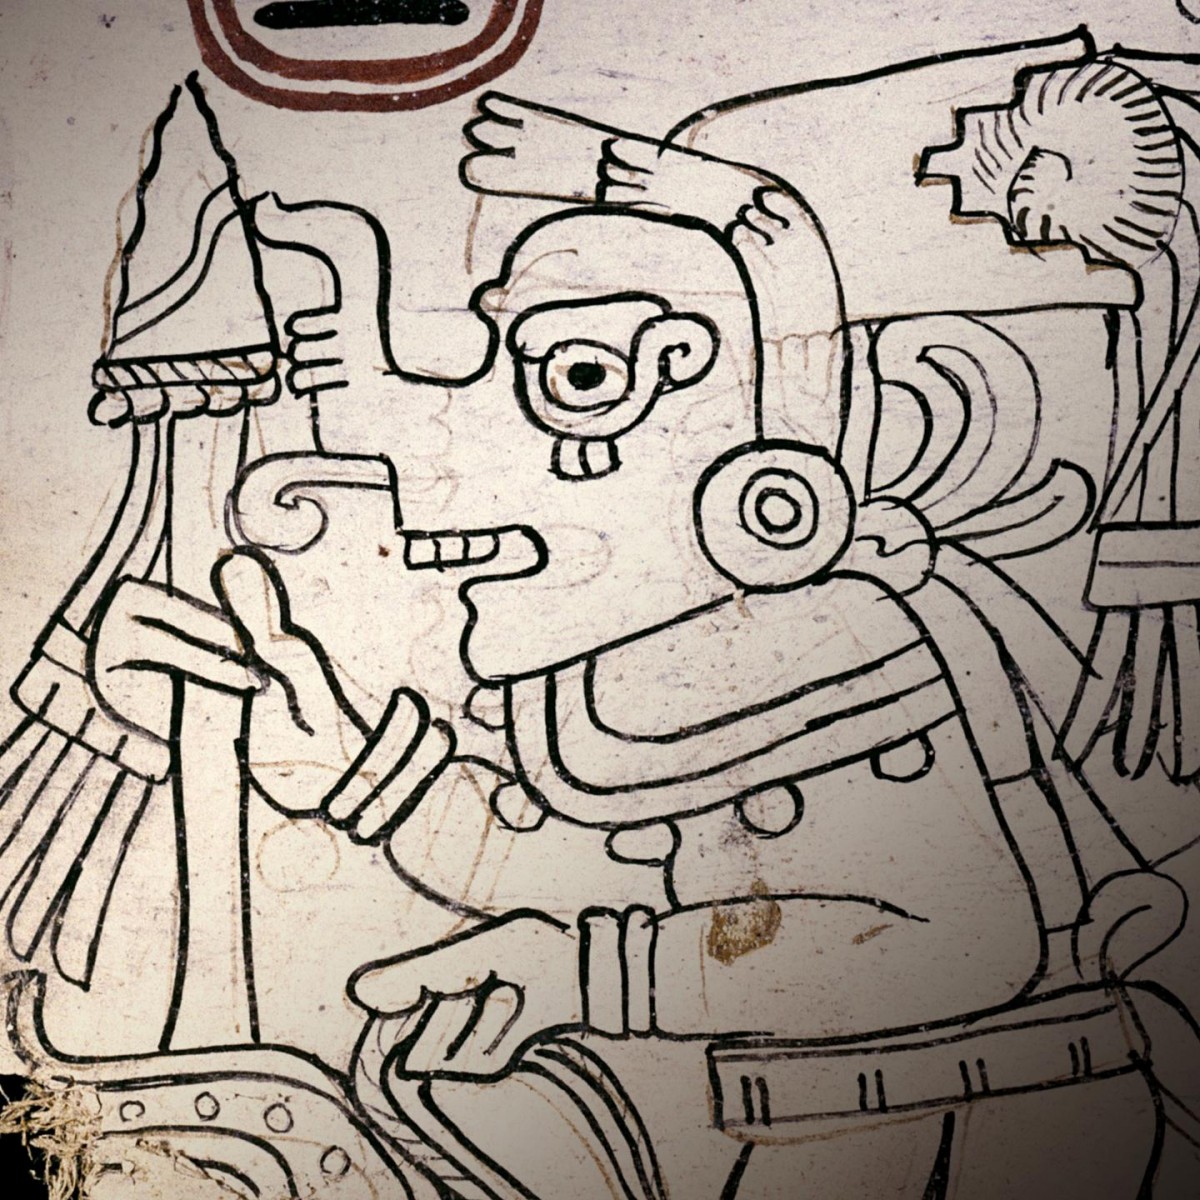 Image from the Grolier Codex, the oldest known manuscript in ancient America. Credit: Justin Kerr